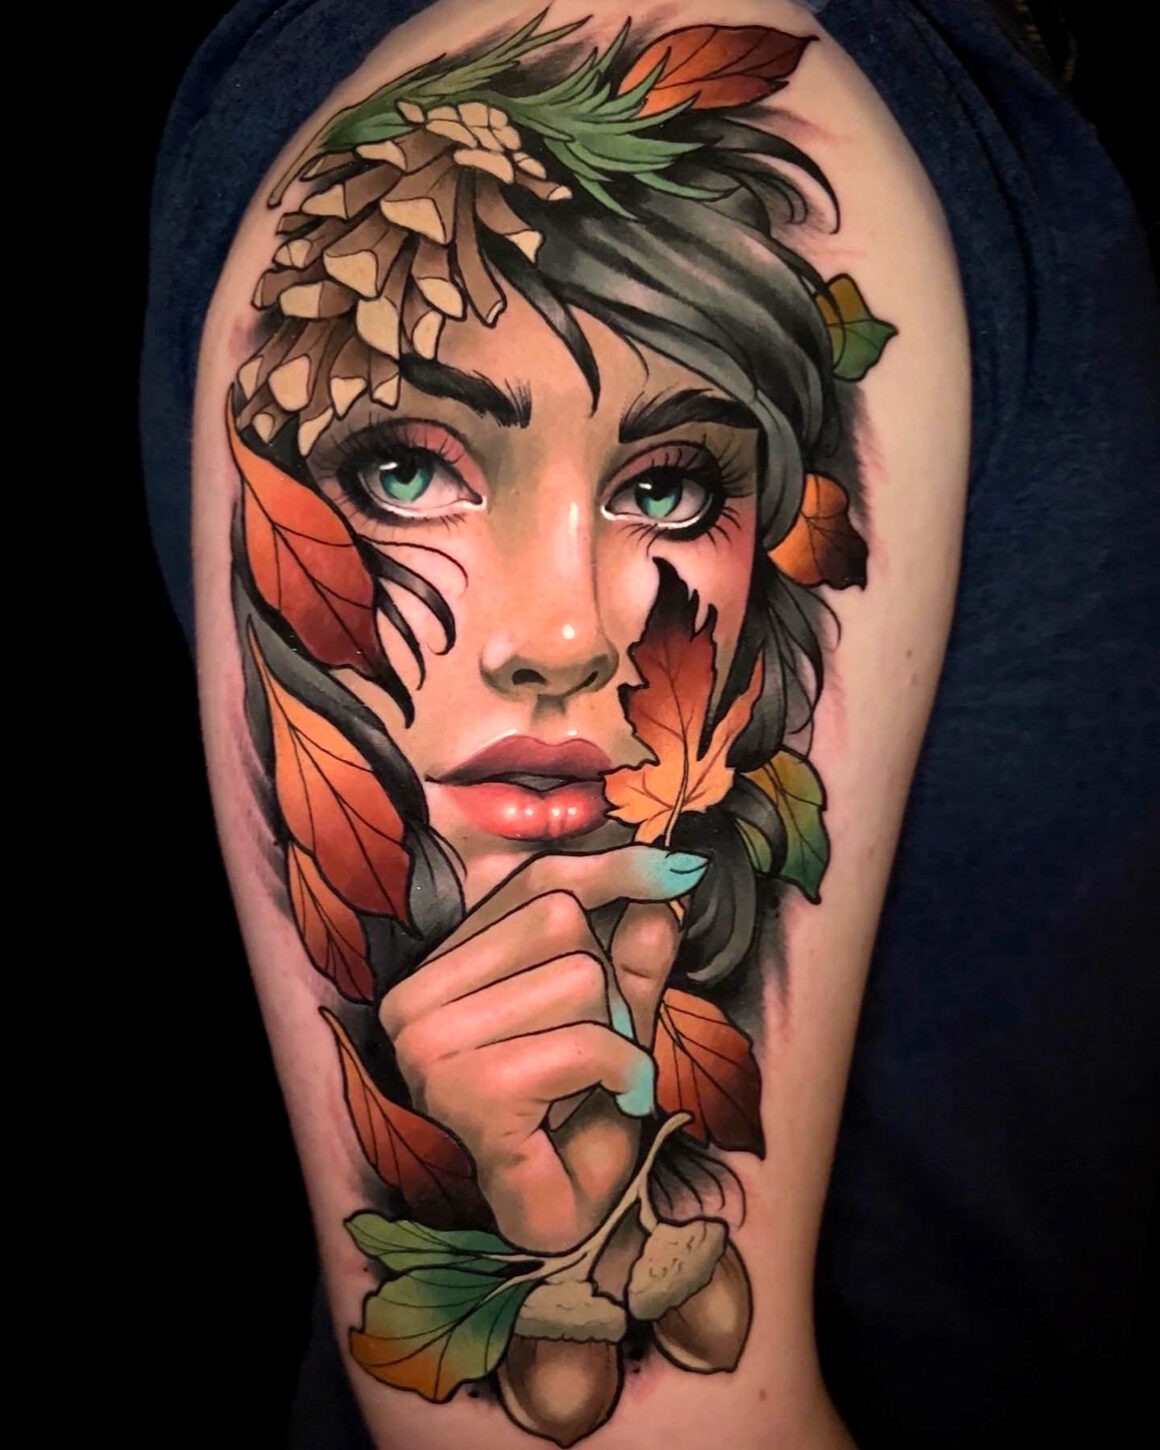 Tattoo by Andrey, @andreytattooing